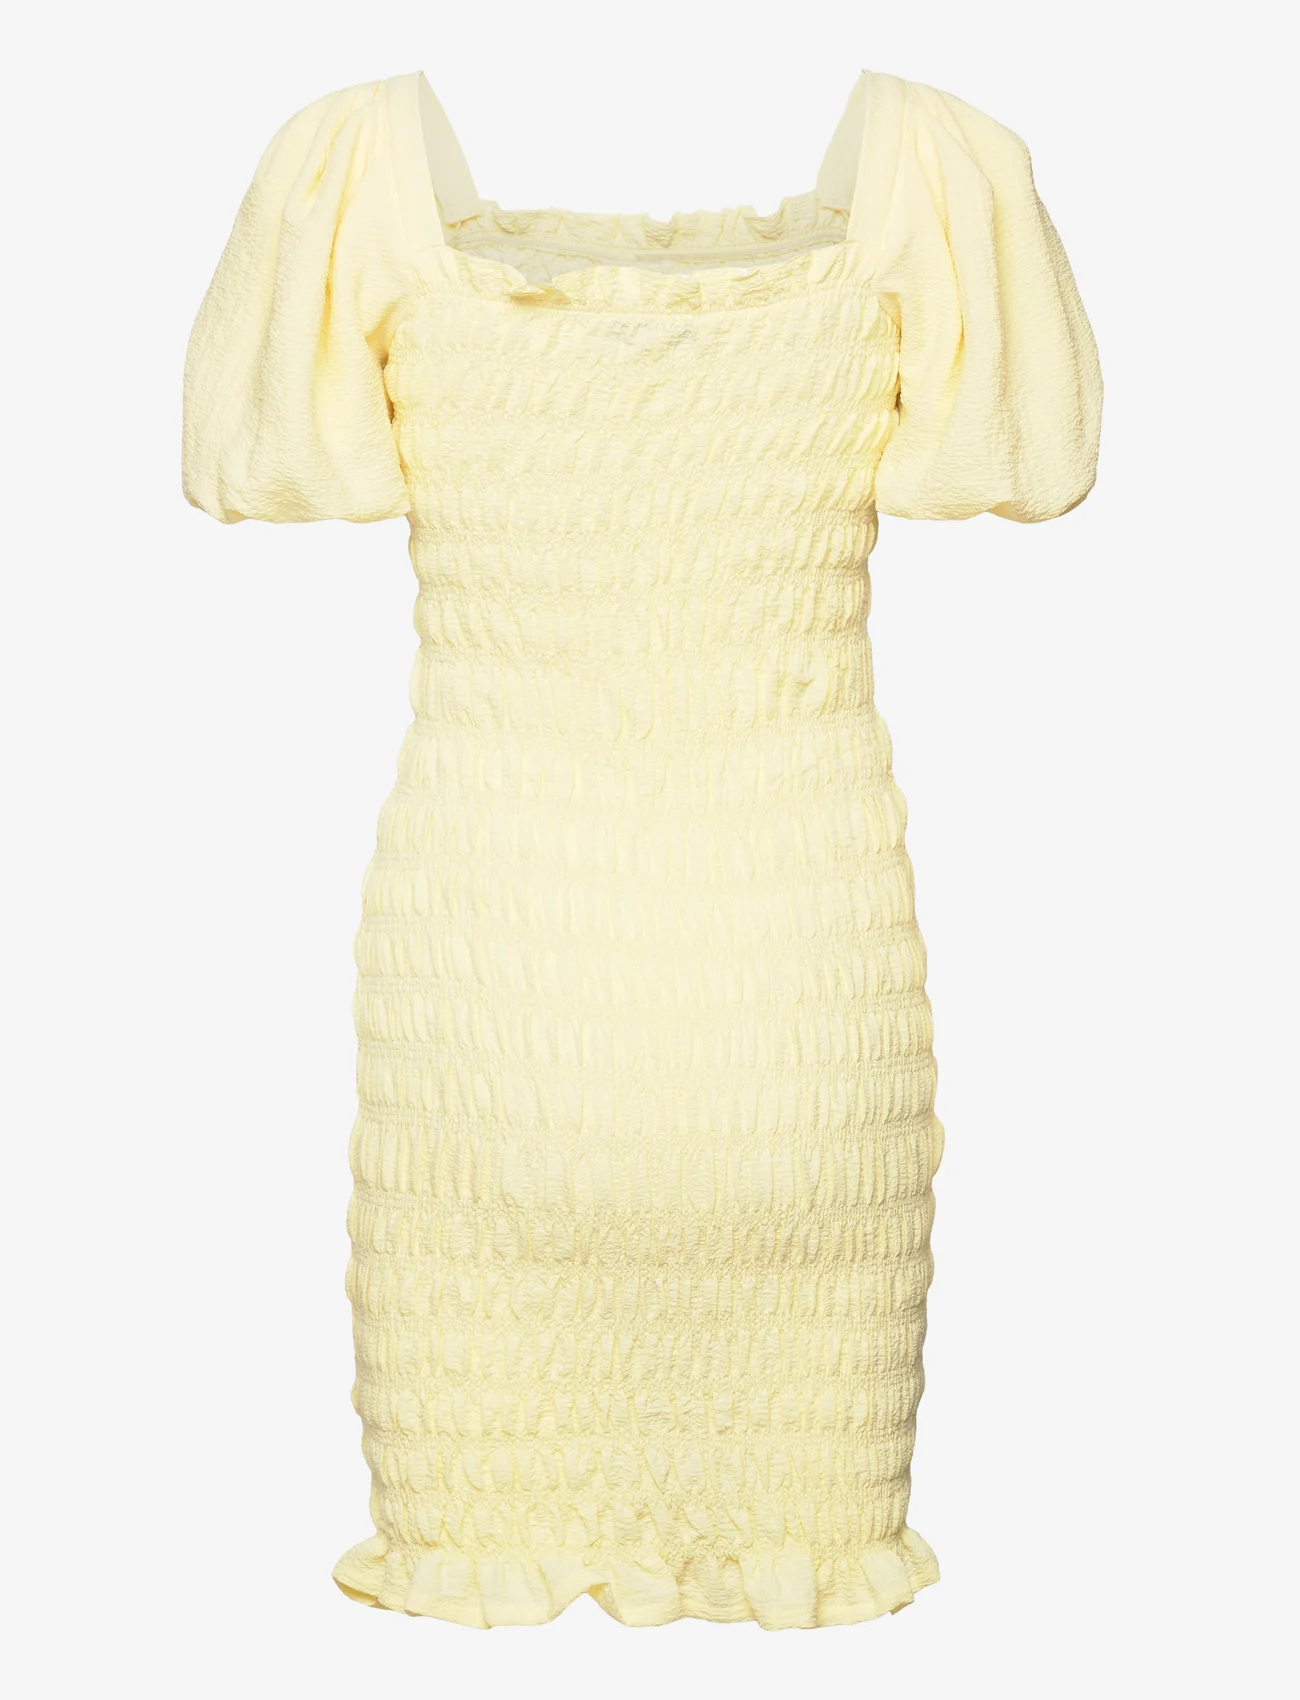 A-View - Rikko solid dress - juhlamuotia outlet-hintaan - yellow - 1